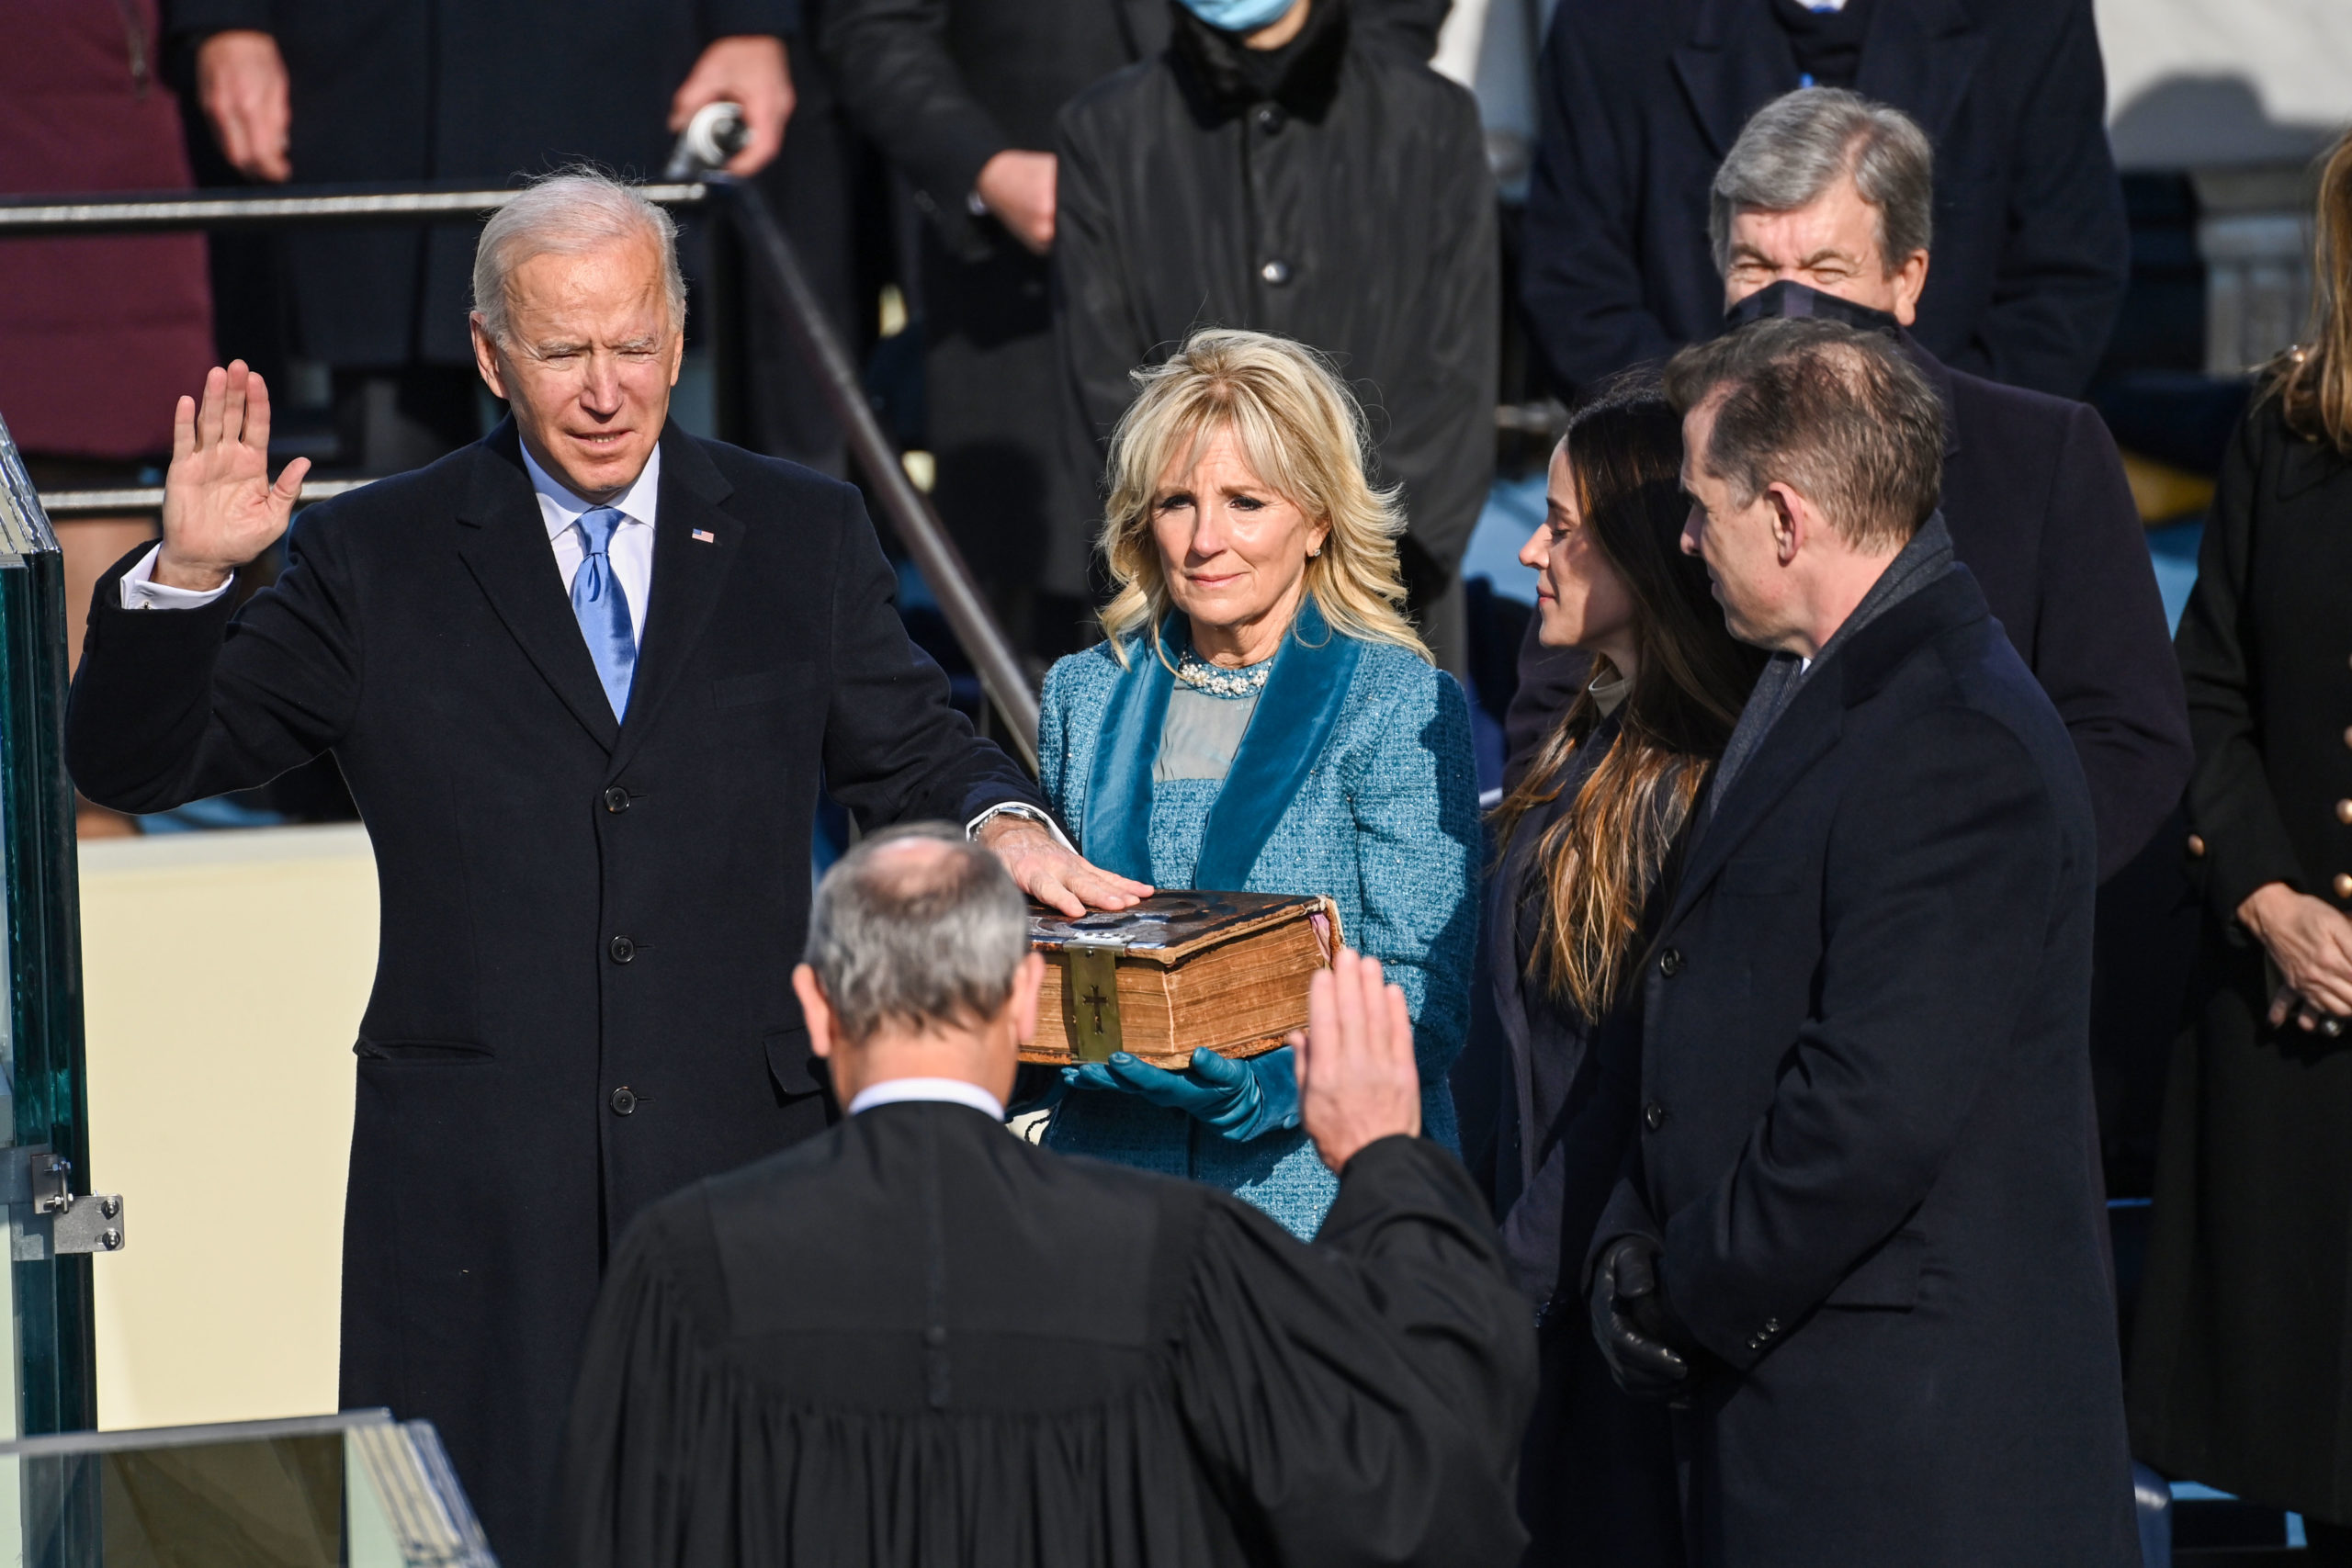 Biden becomes 46th President of the United States, pledges to seek unity